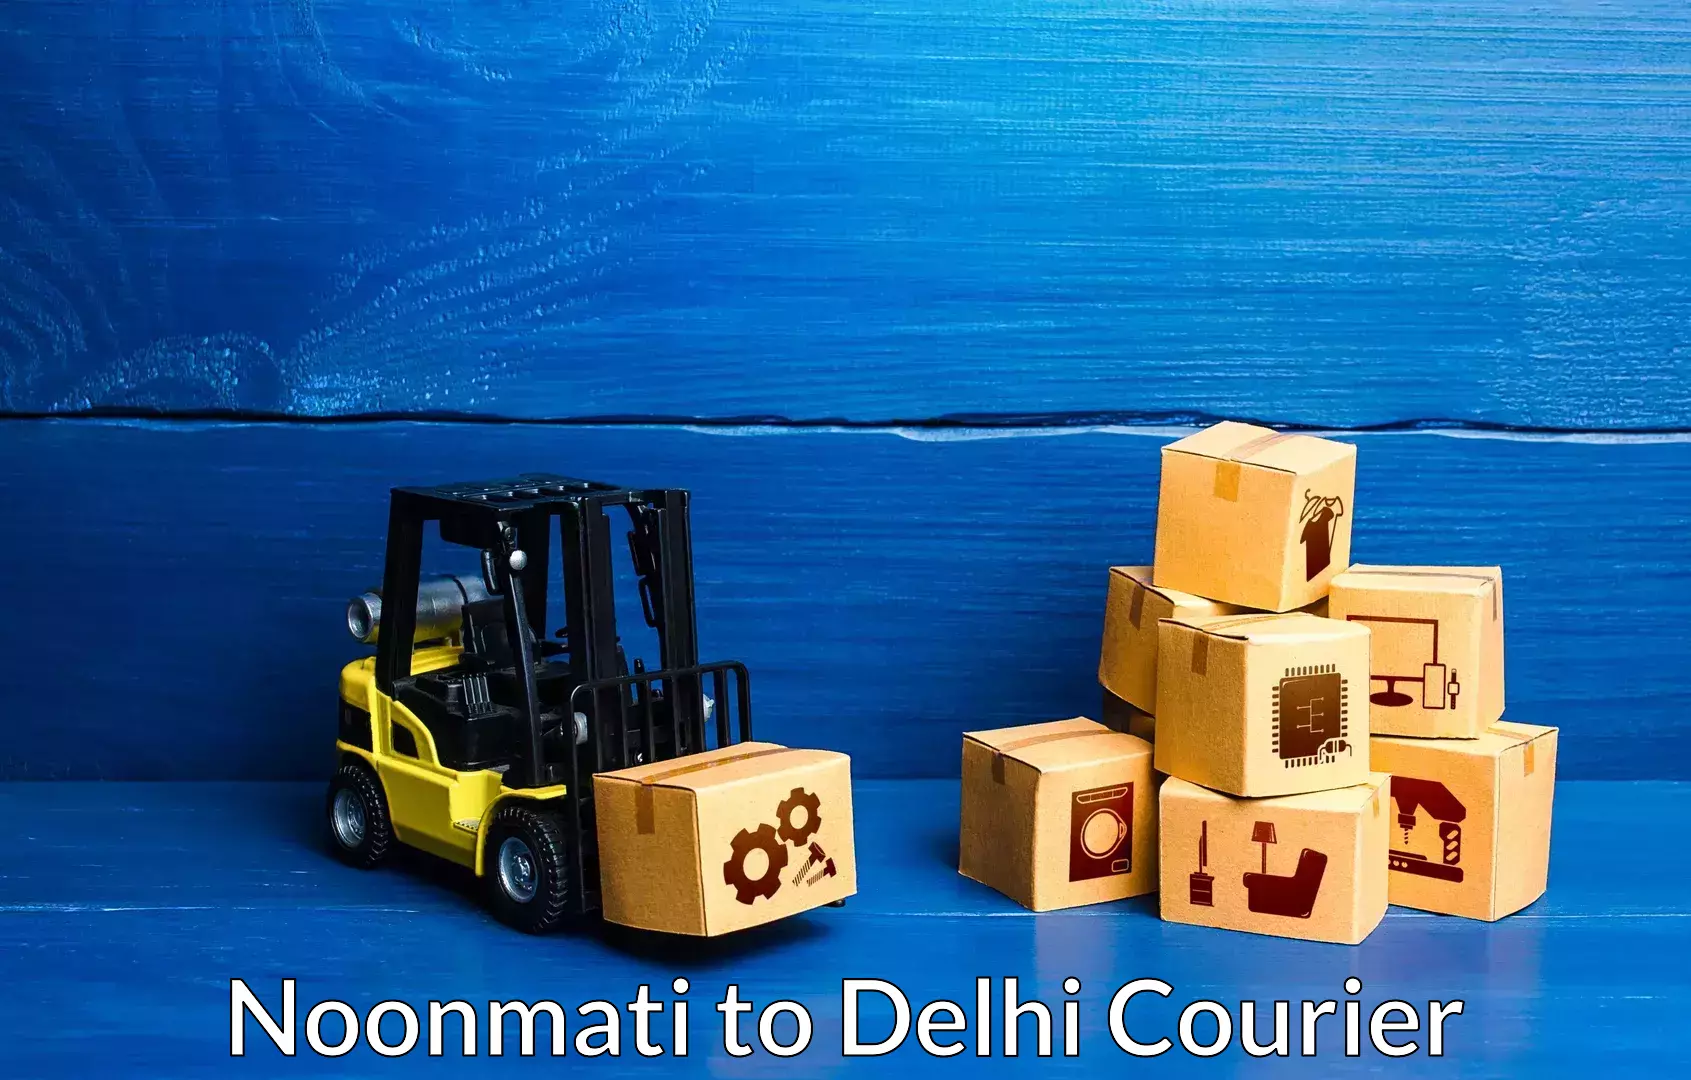 Skilled furniture movers Noonmati to Delhi